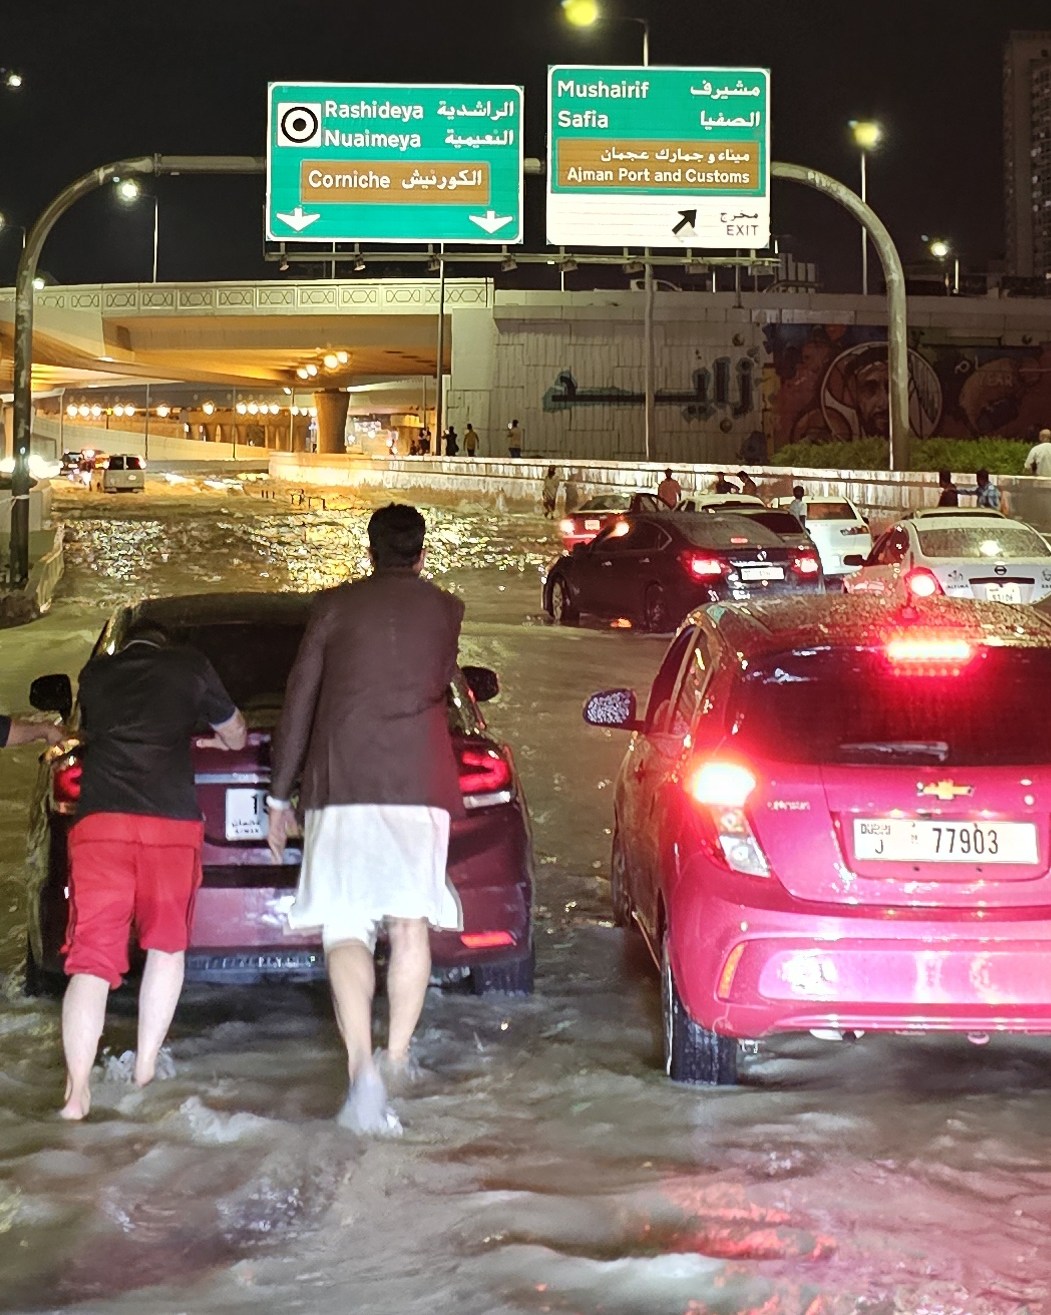 Residents of Dubai had to push their cars to safety through high water on Tuesday night